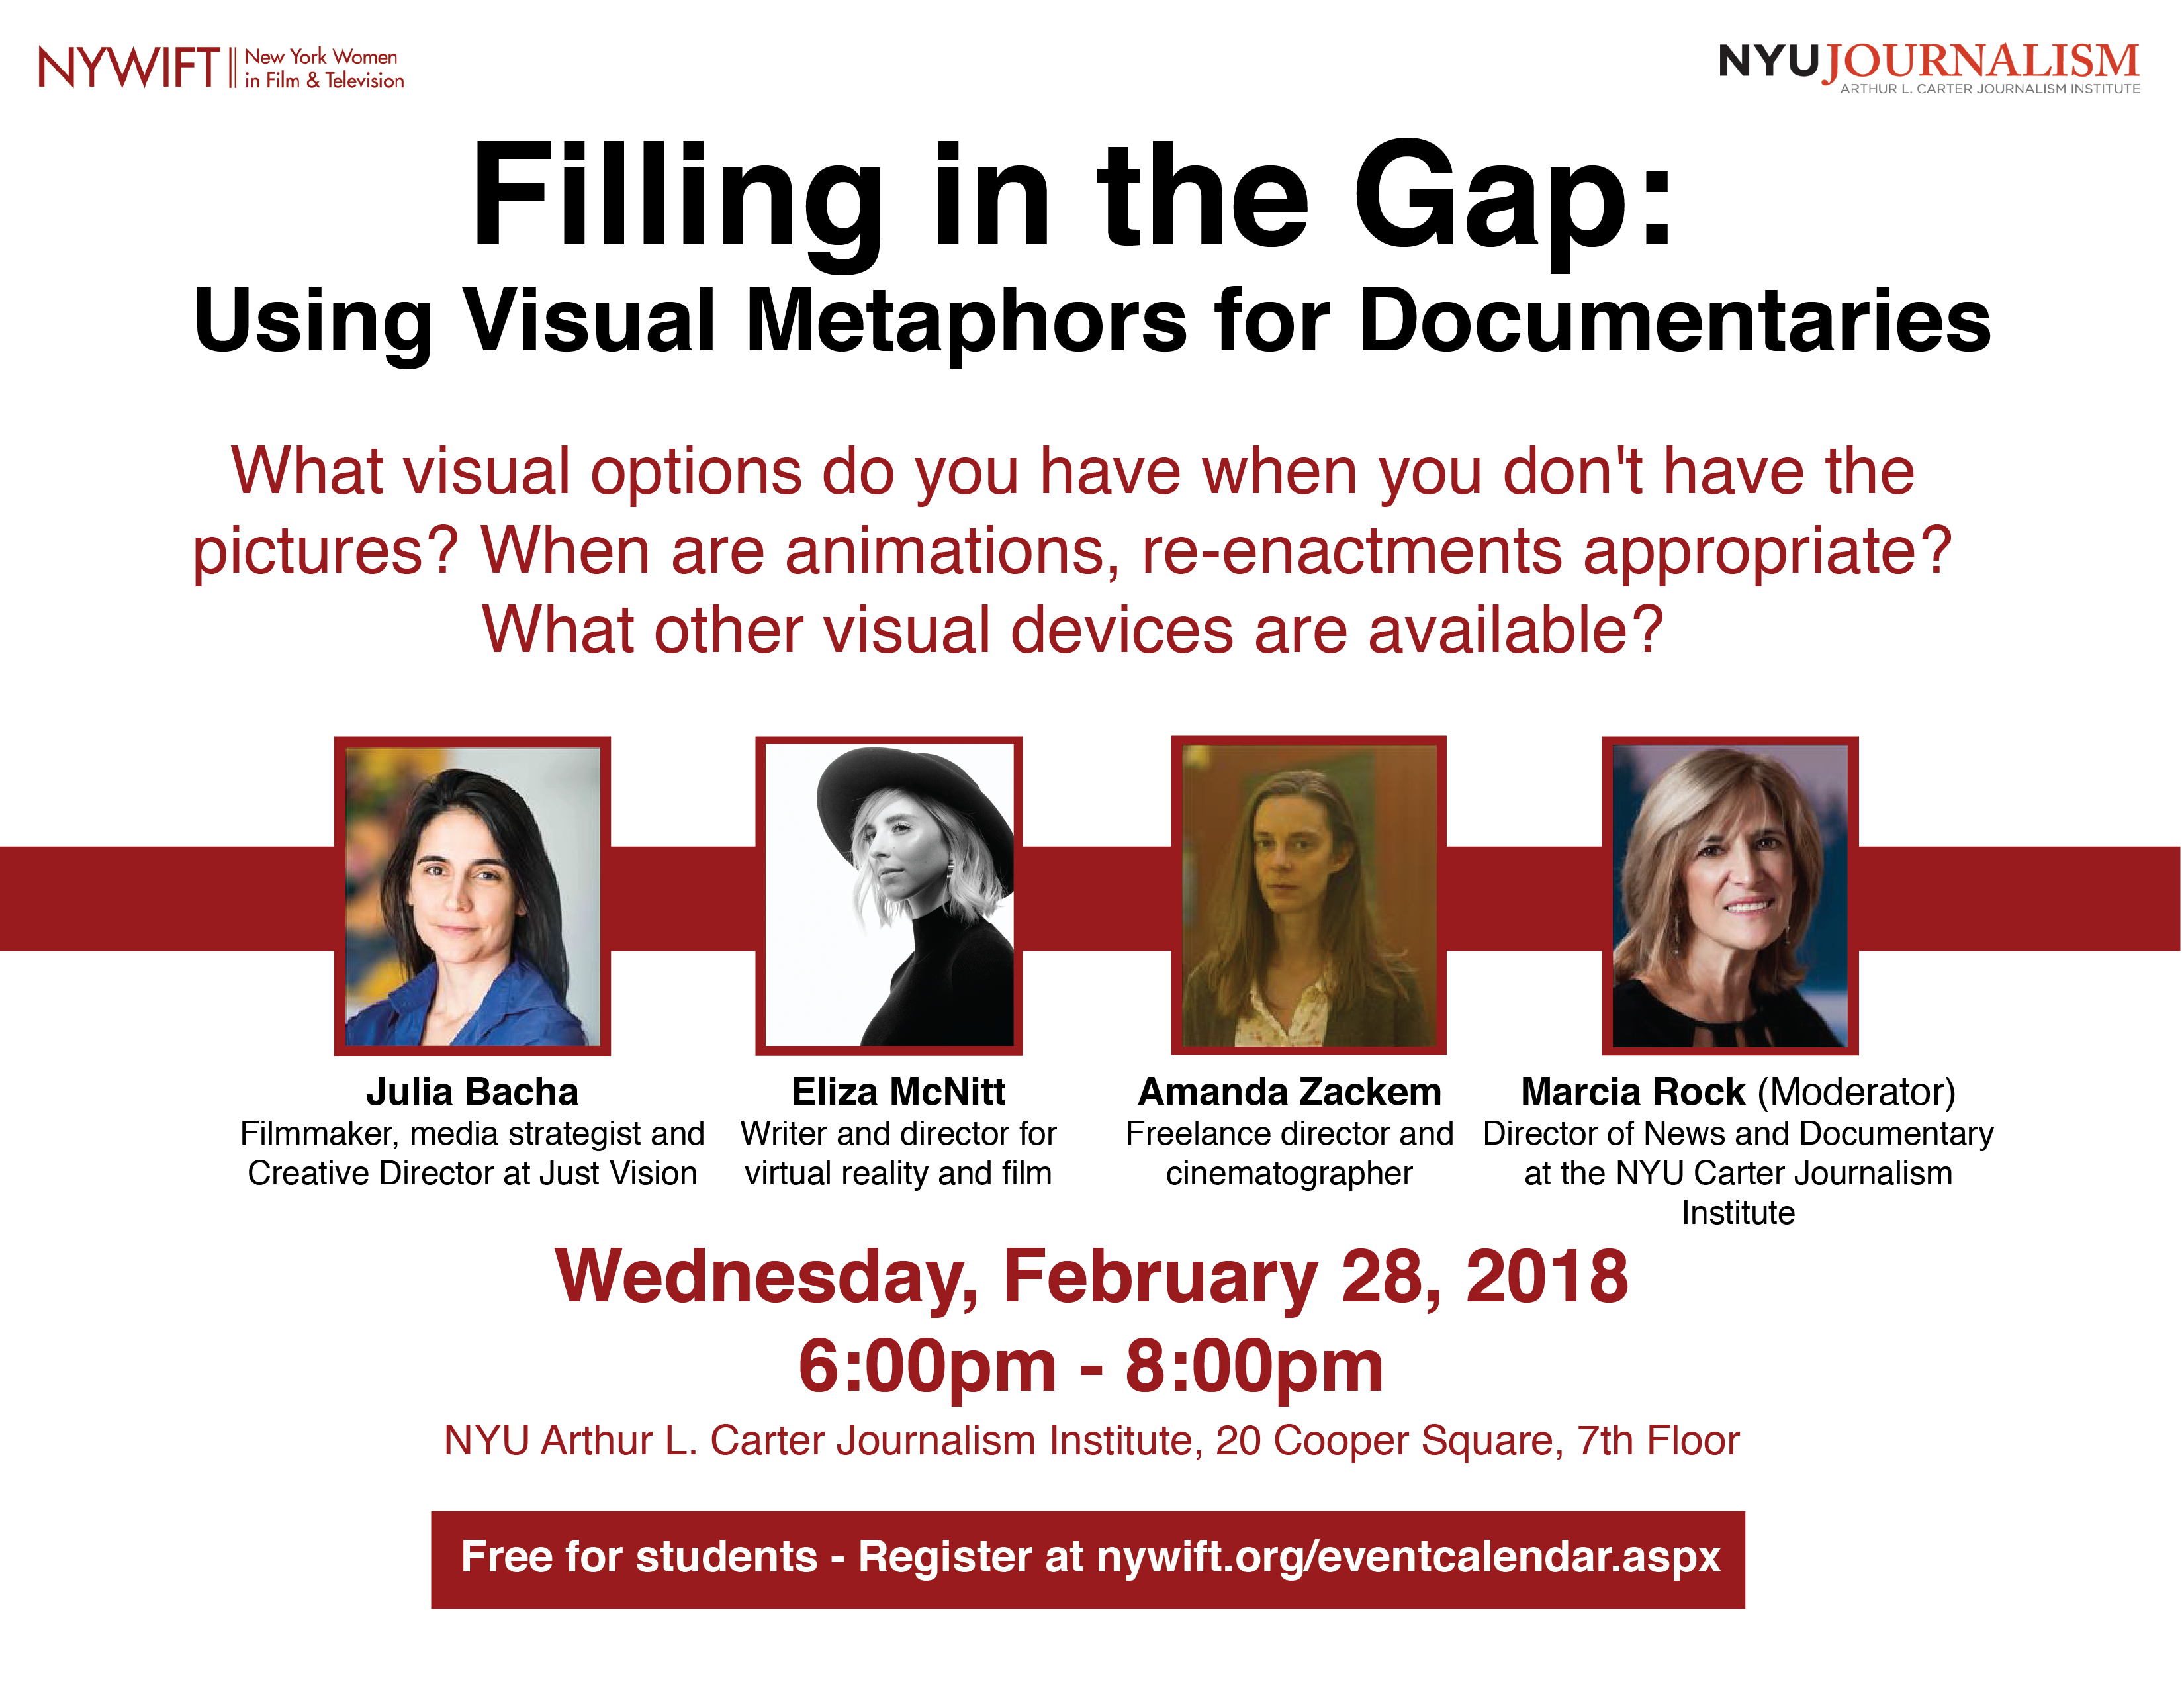 Filling in the Gap: Using Visual Metaphors for Documentaries - Event Poster 2018